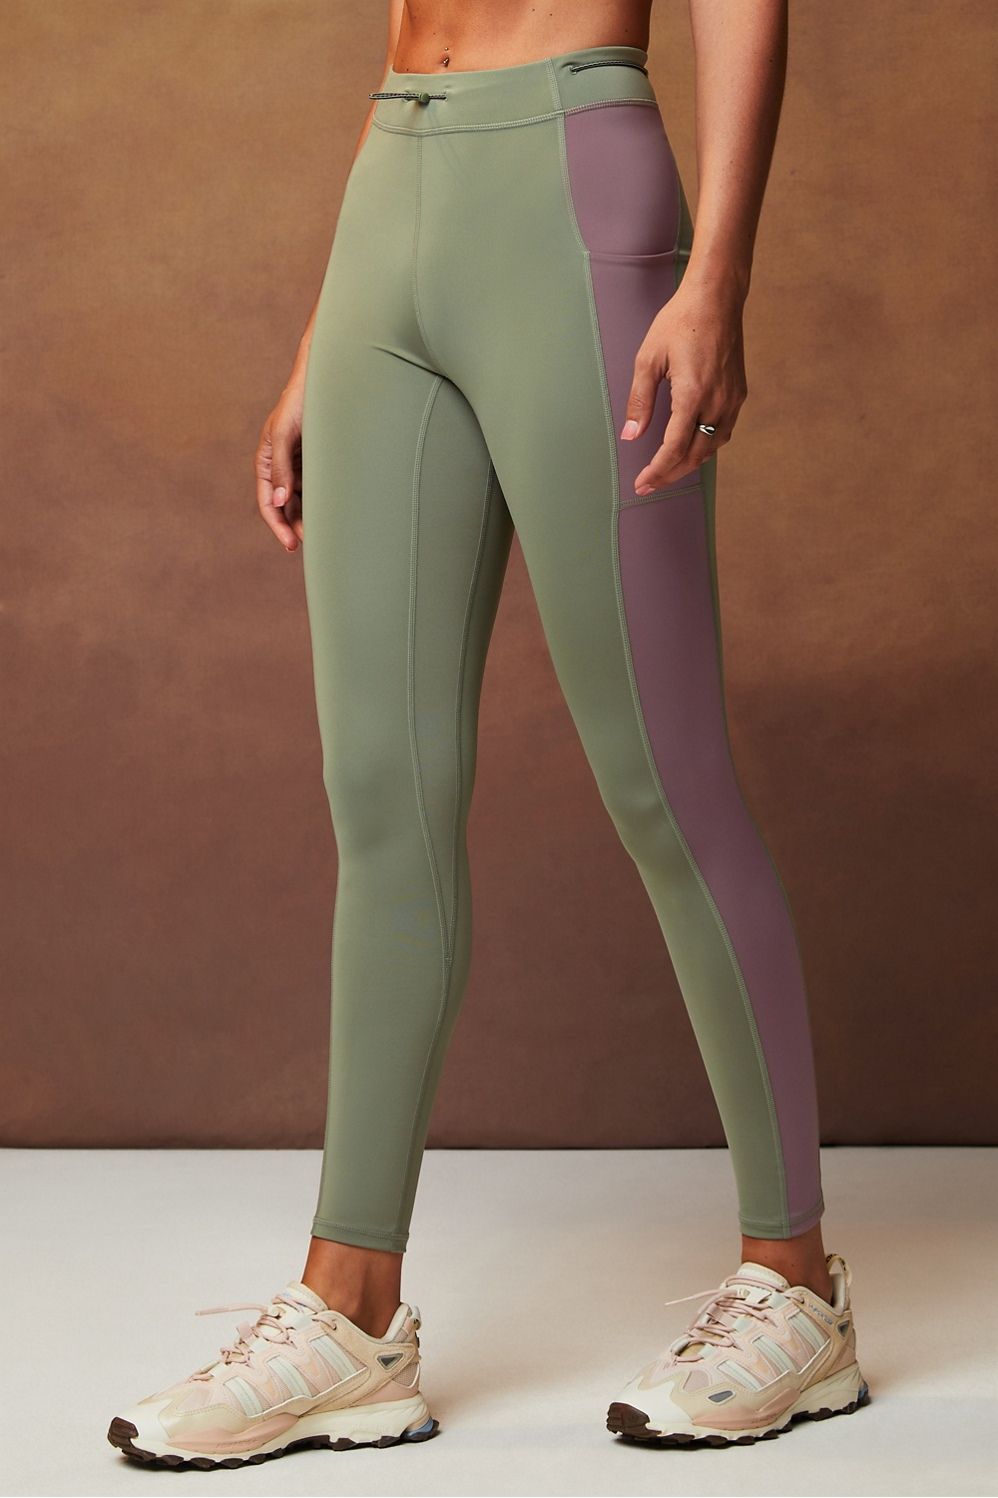 Motion365+ High-Waisted Bungee Legging | Fabletics - North America